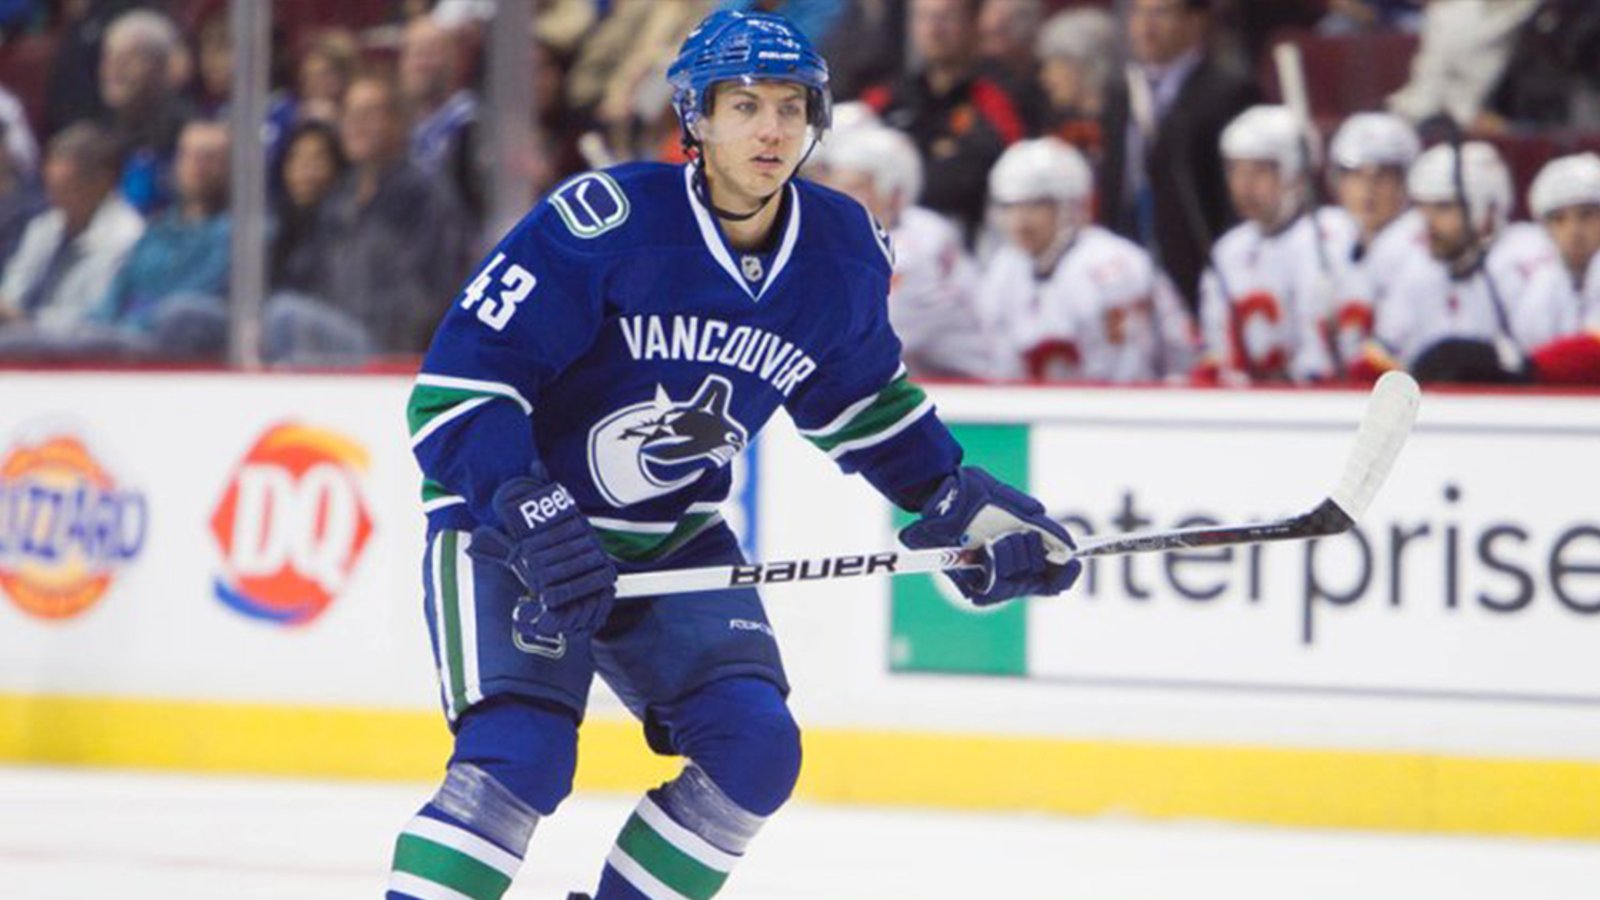 Report: Canucks' Rodin clears waivers